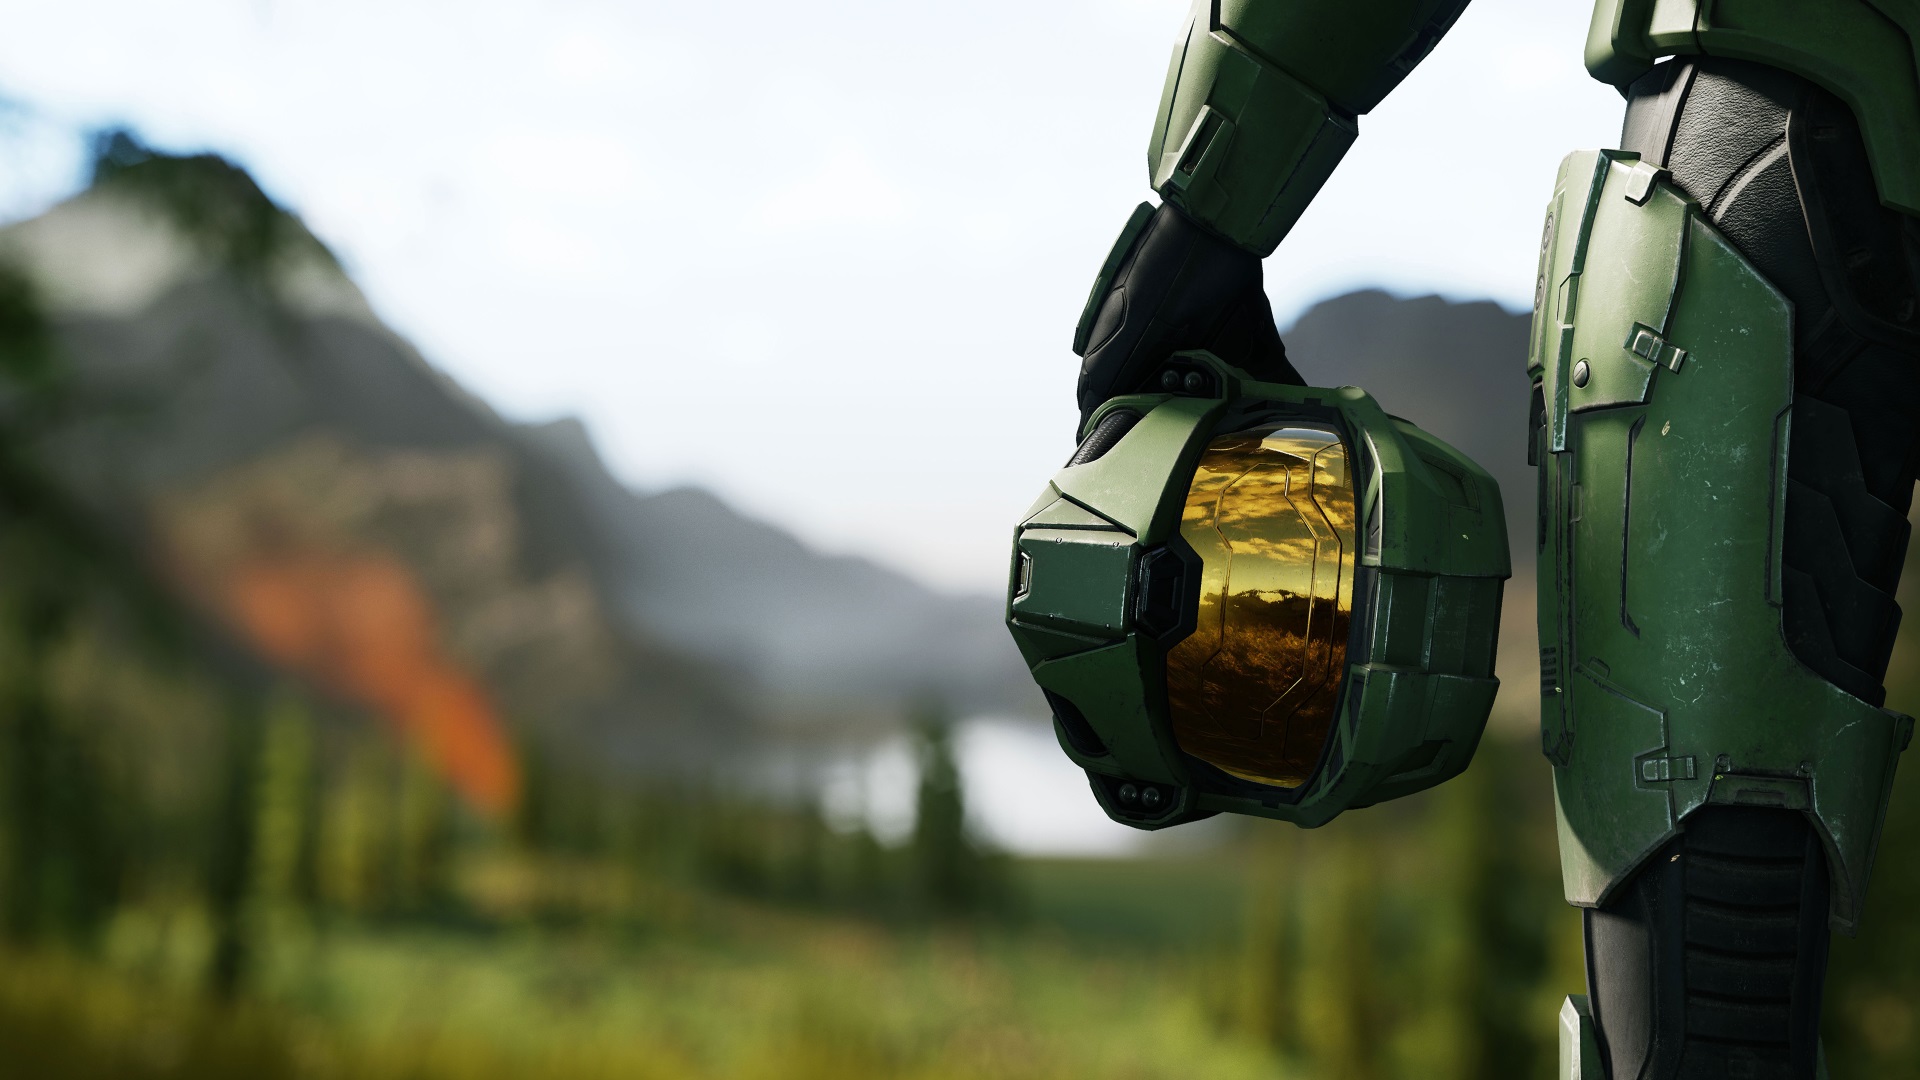 next halo release date